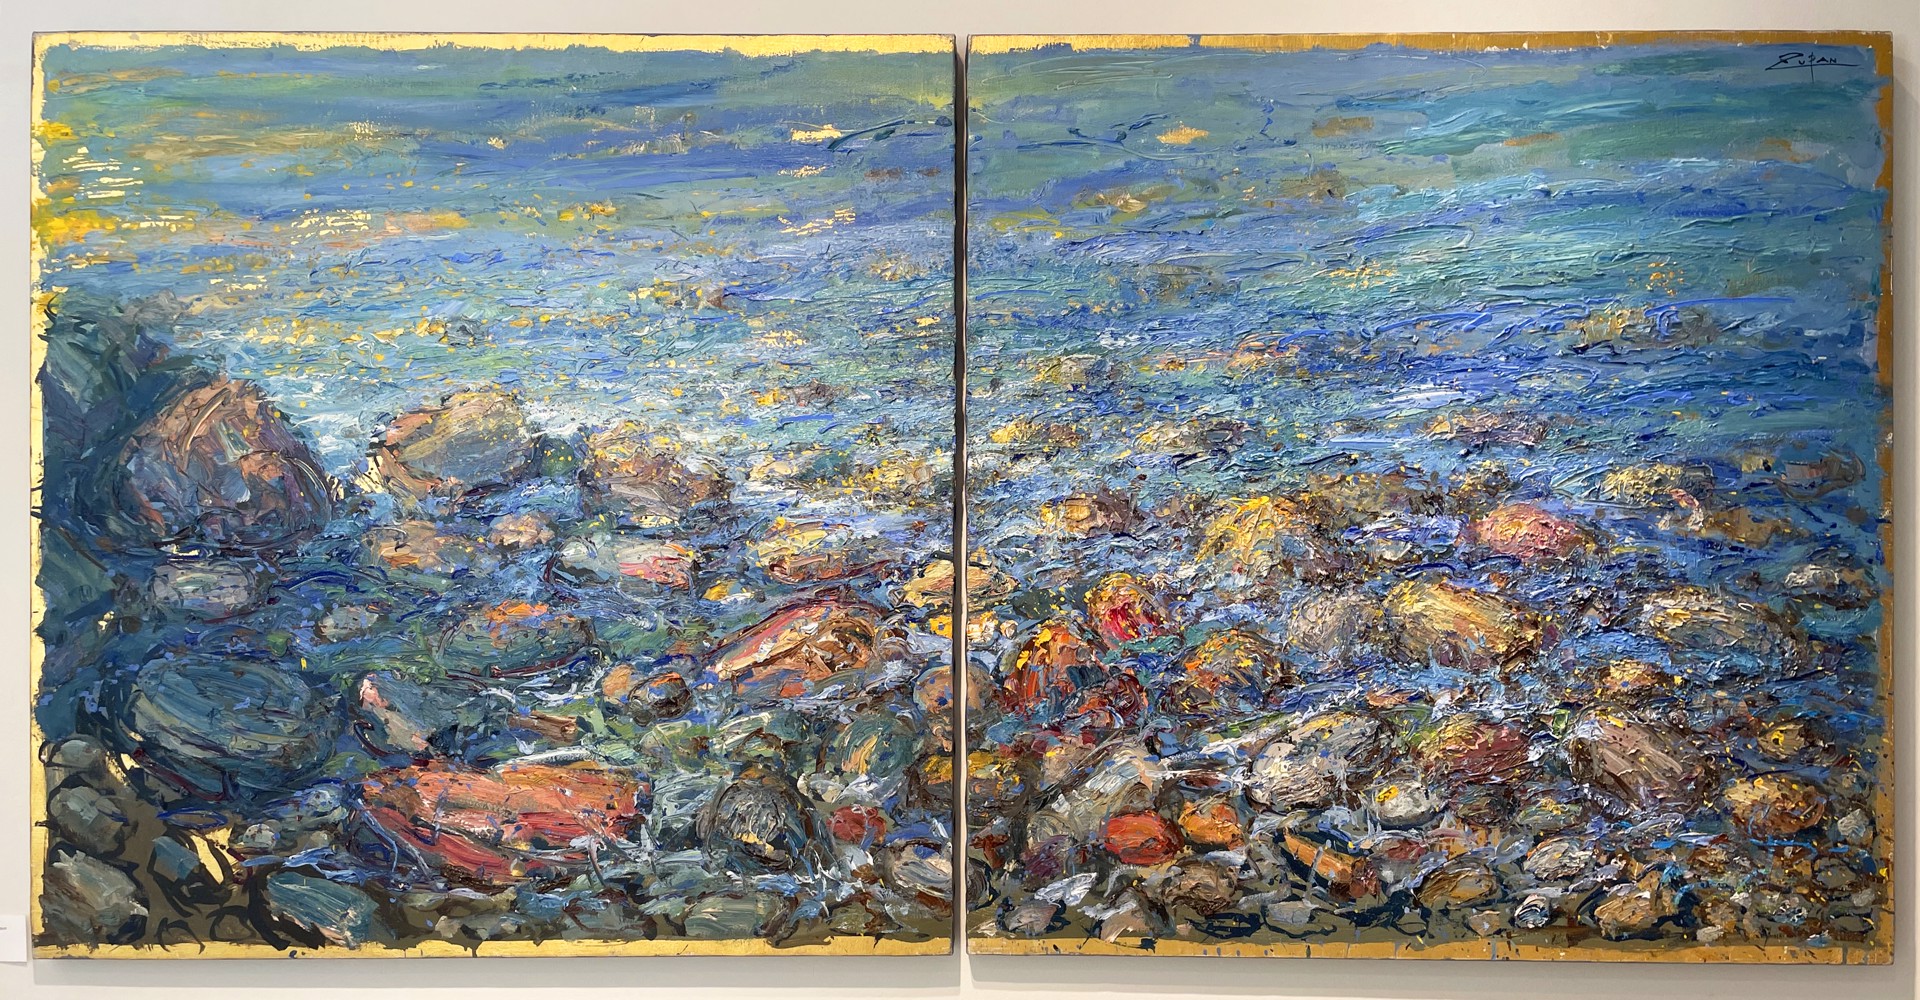 Rocks and Sea, Diptych by Bruno Zupan